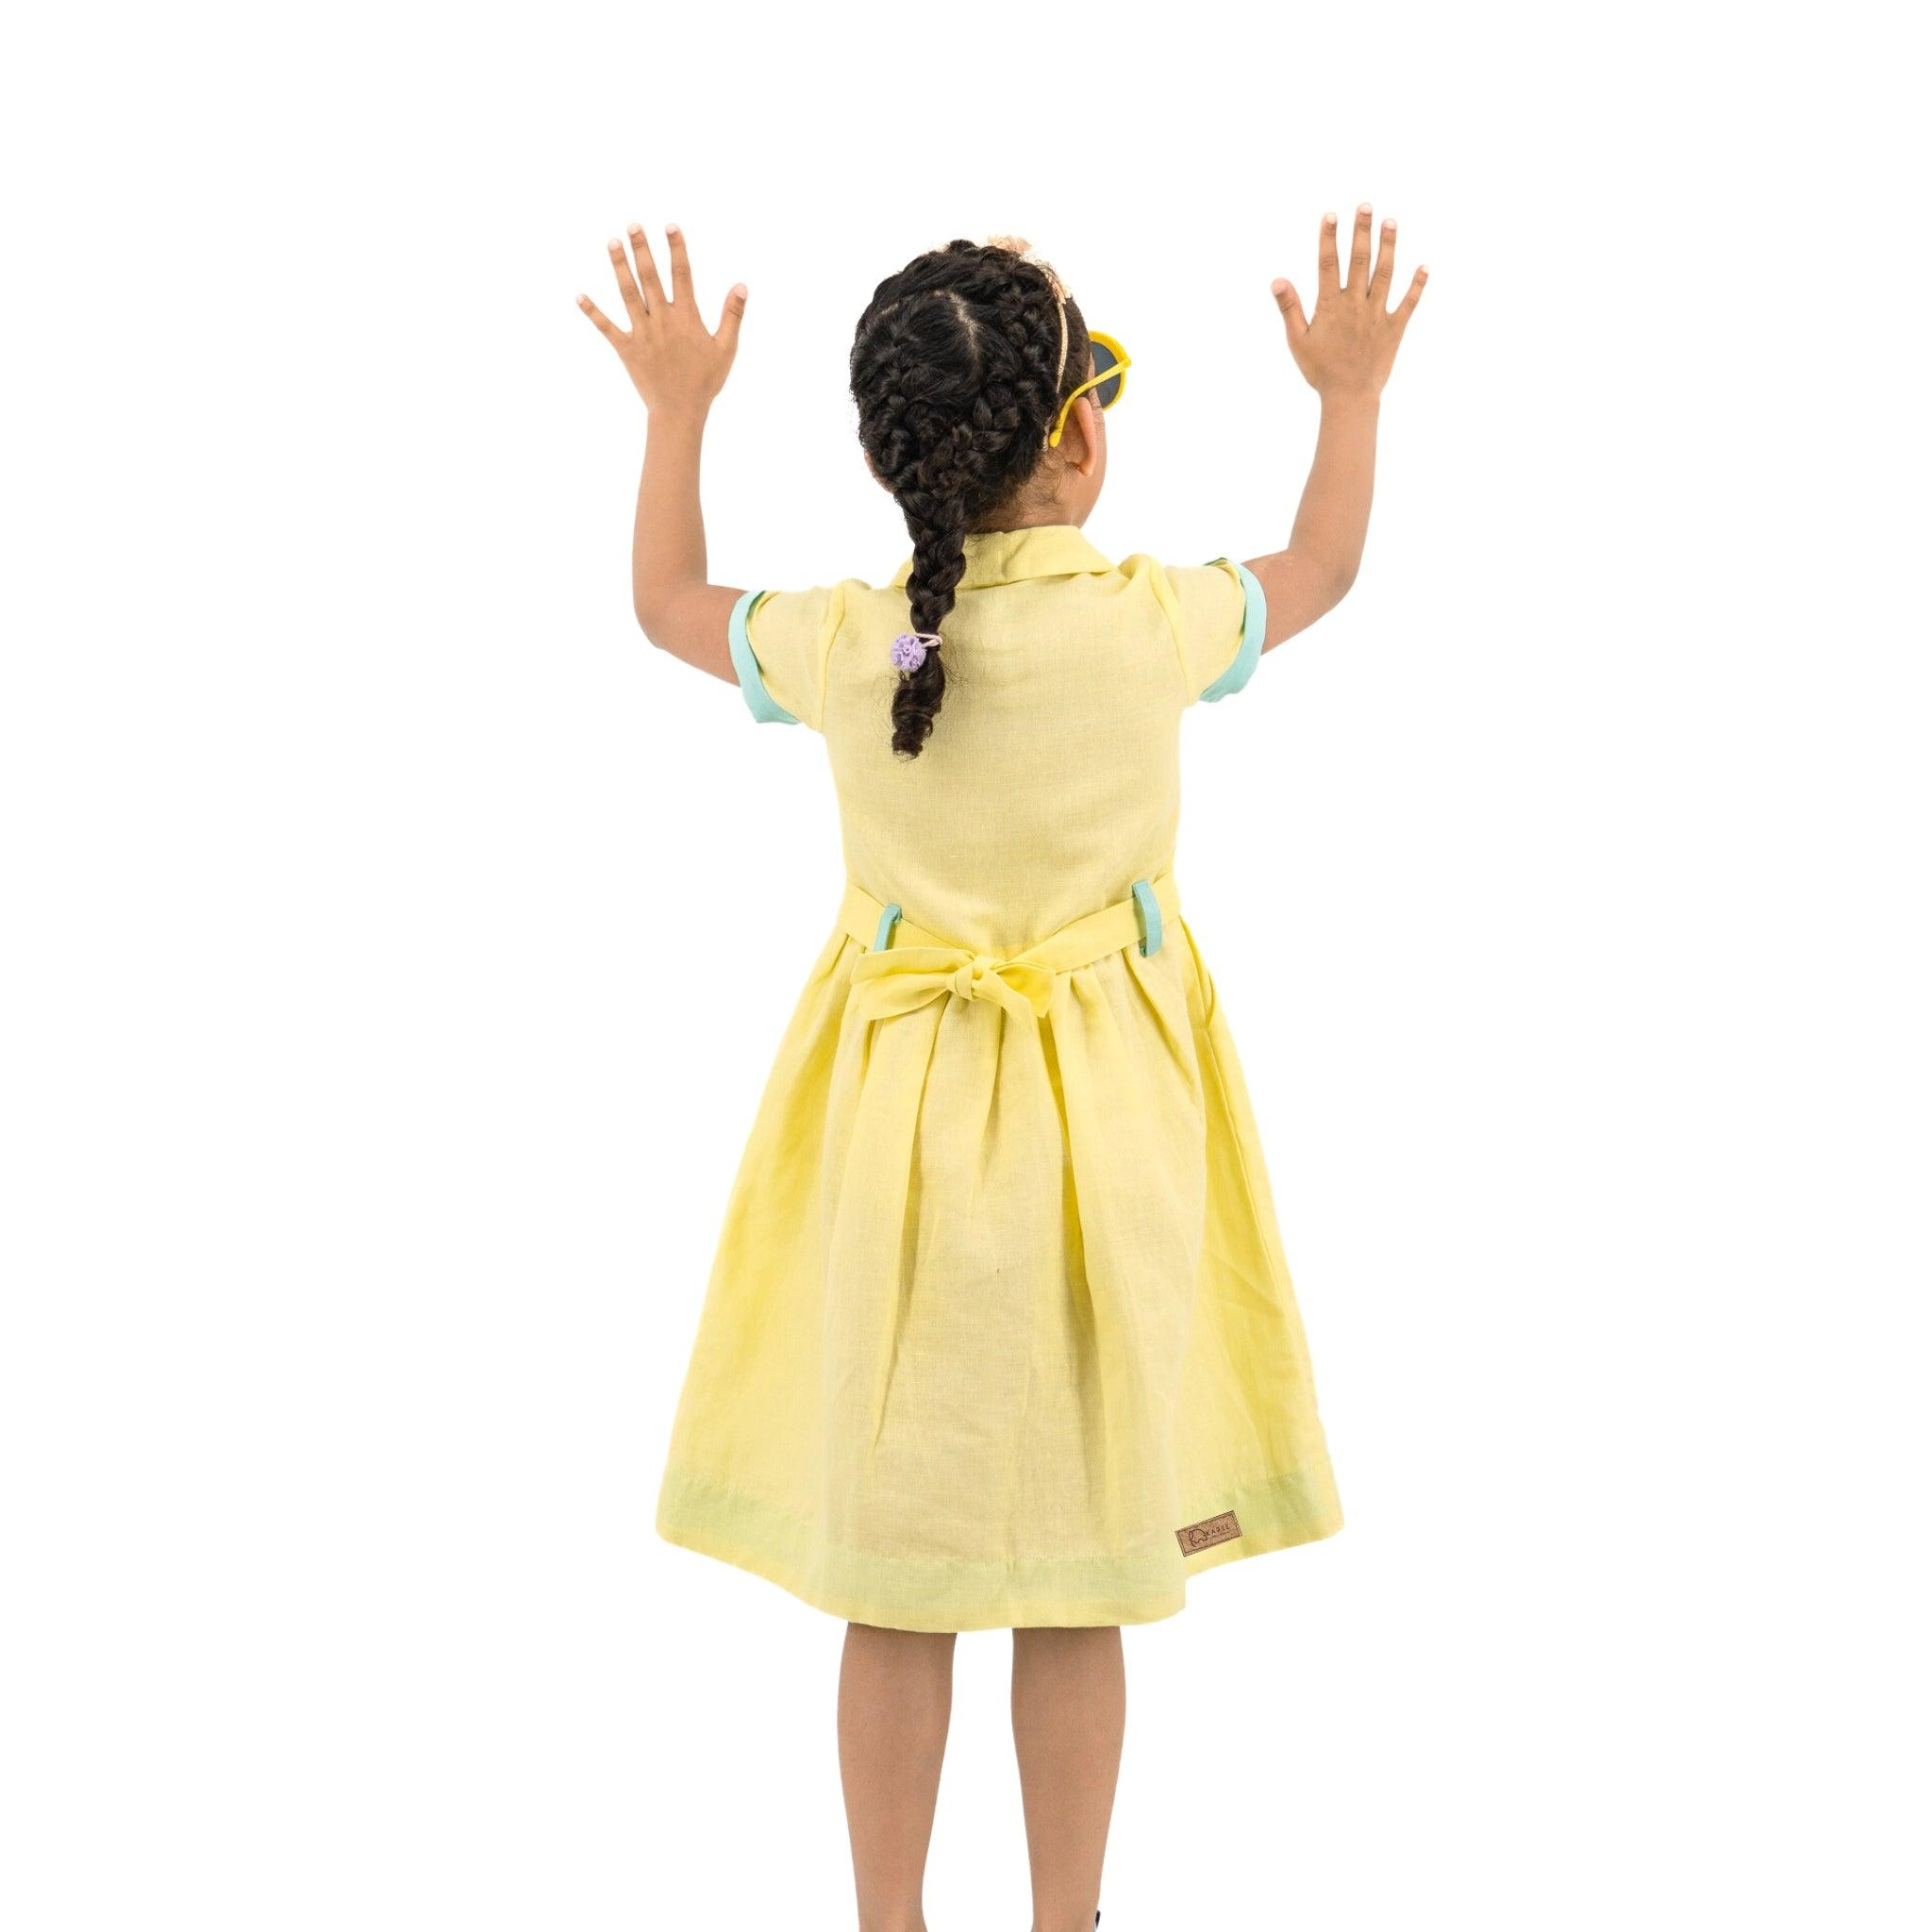 Back view of a young girl with braided hair, wearing a Karee Elfin Yellow Linen Below Knee Length Dress for Girls and yellow glasses, standing with her hands raised against a white background.